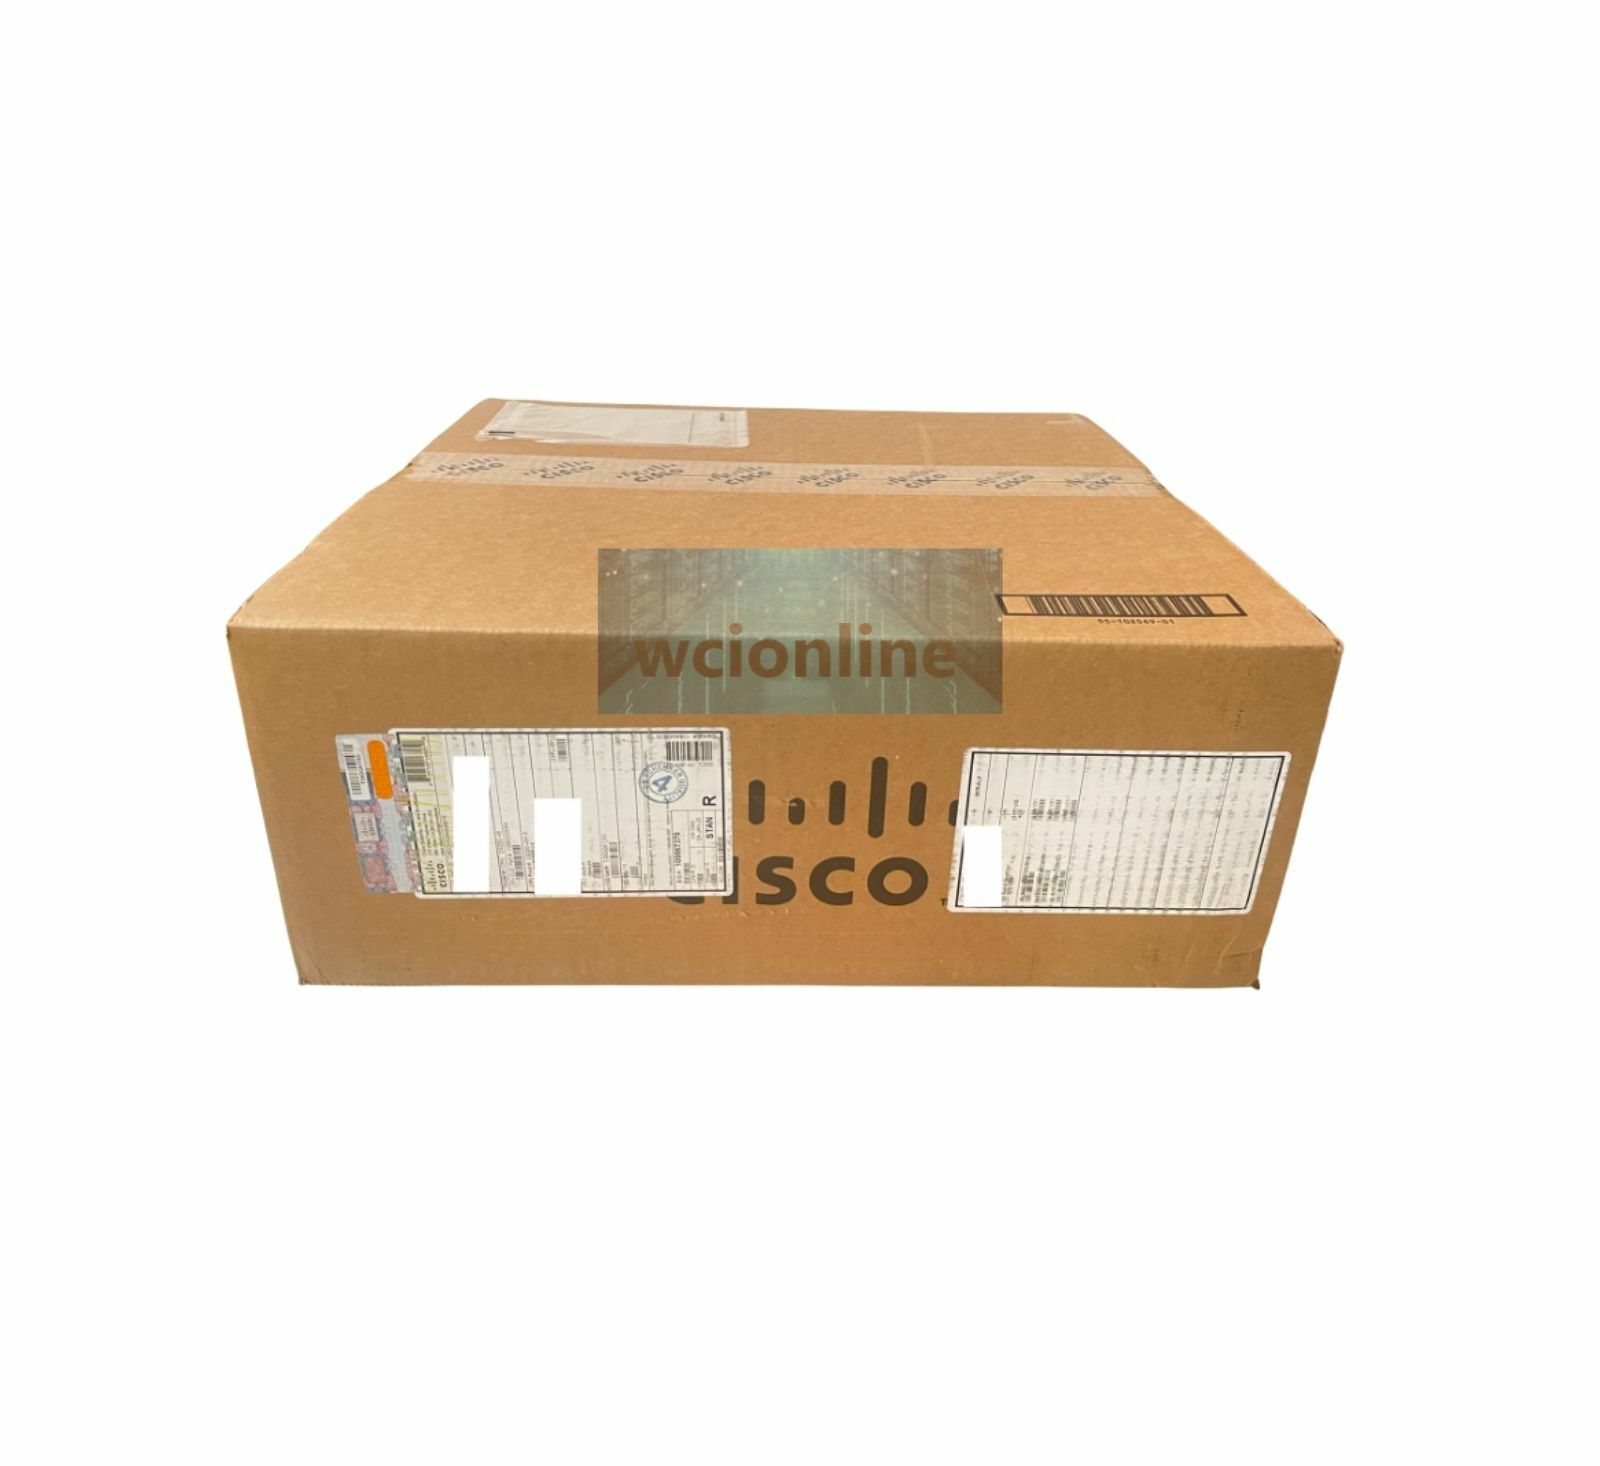 Cisco C9200-48P-E 48-port PoE+ with Dual PWR-C5-1KWAC PS - *New Open Box*